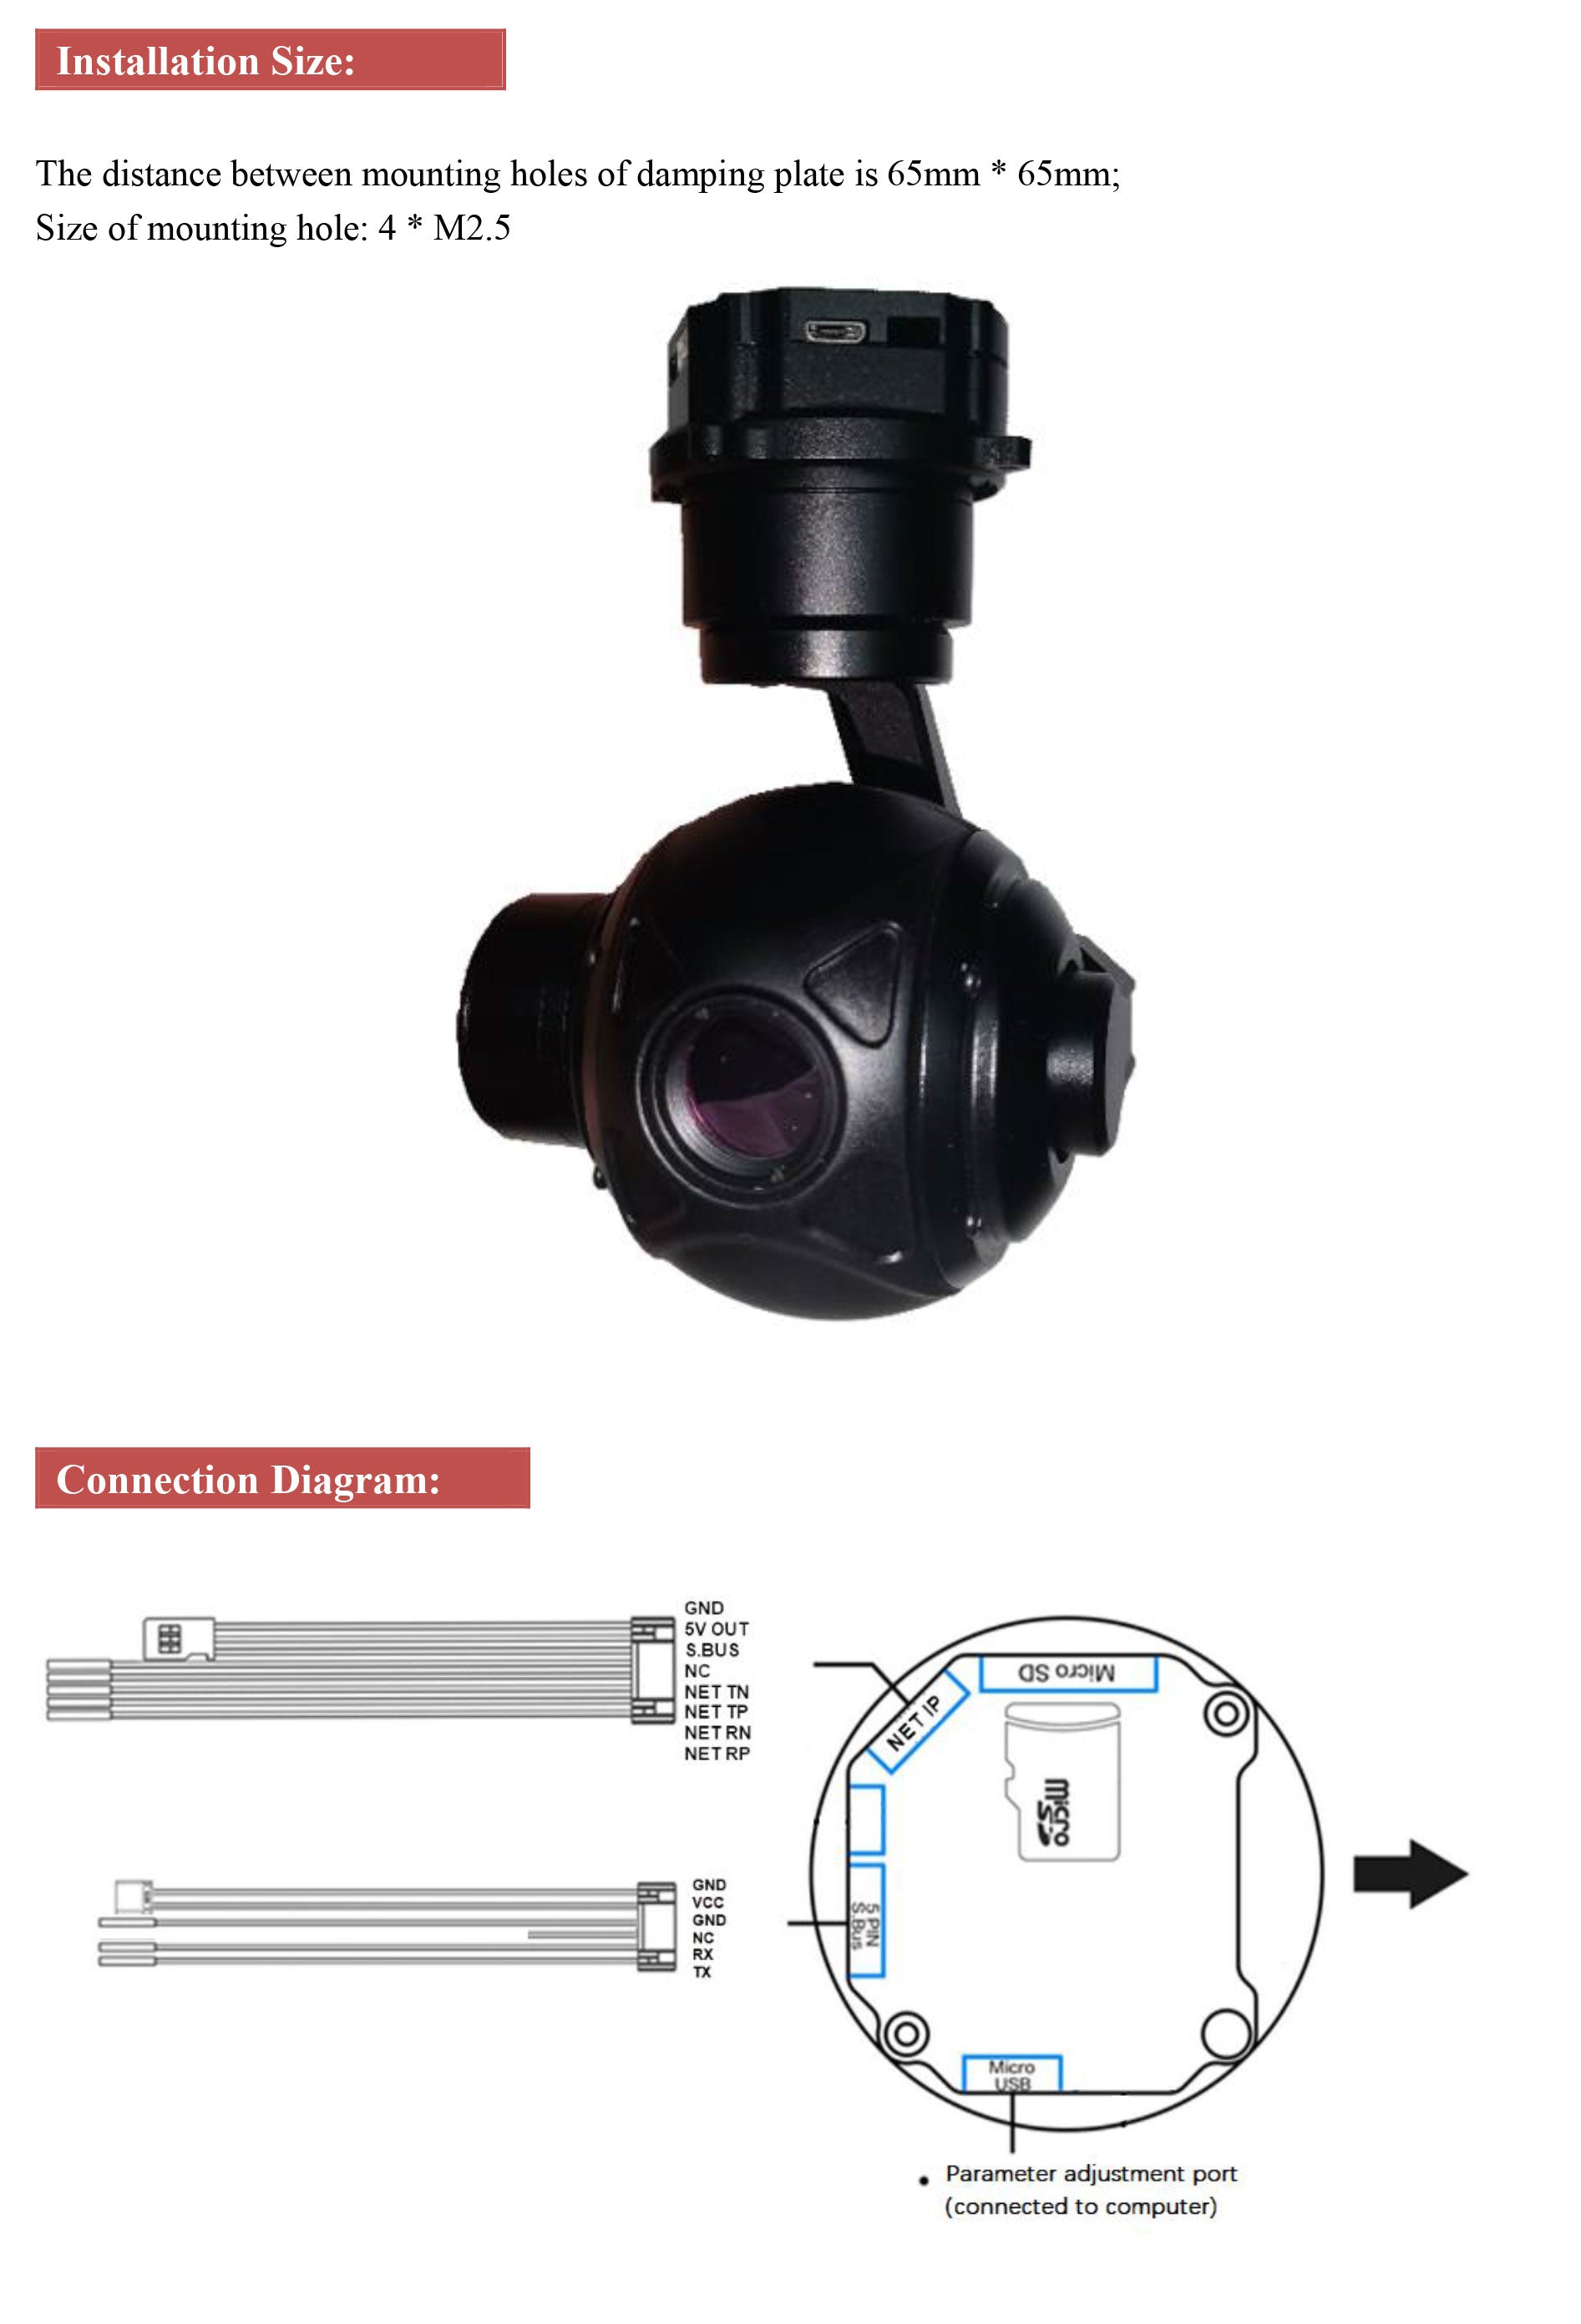 TOPOTEK SIP640G13 Thermal Camera Gimbal, Mounting plate: 6mm x 6mm with 4mm diameter holes; connection diagram not provided.